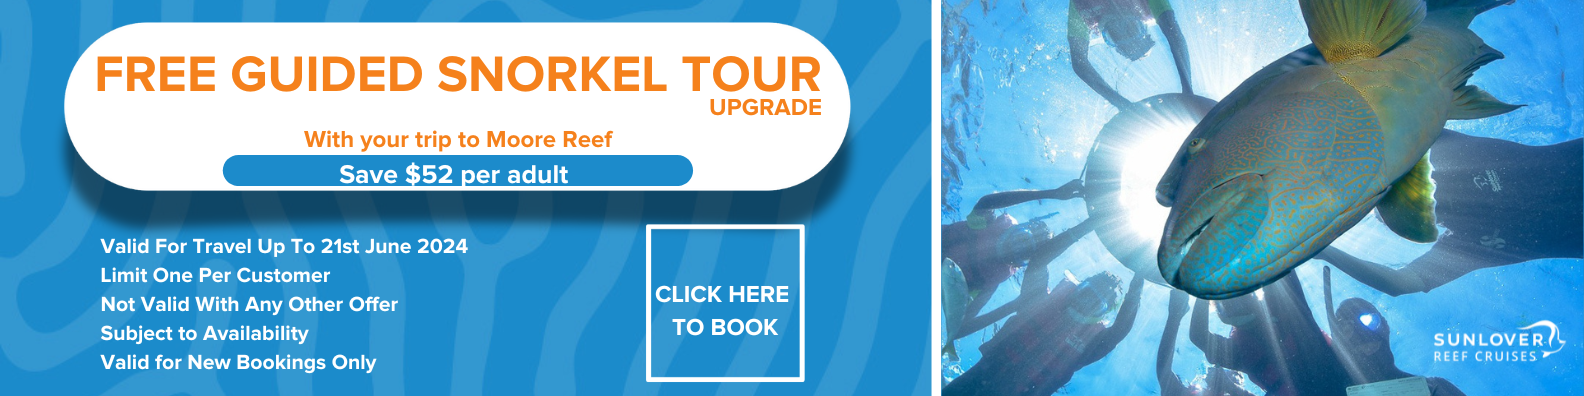 Free guided snorkel tour upgrade